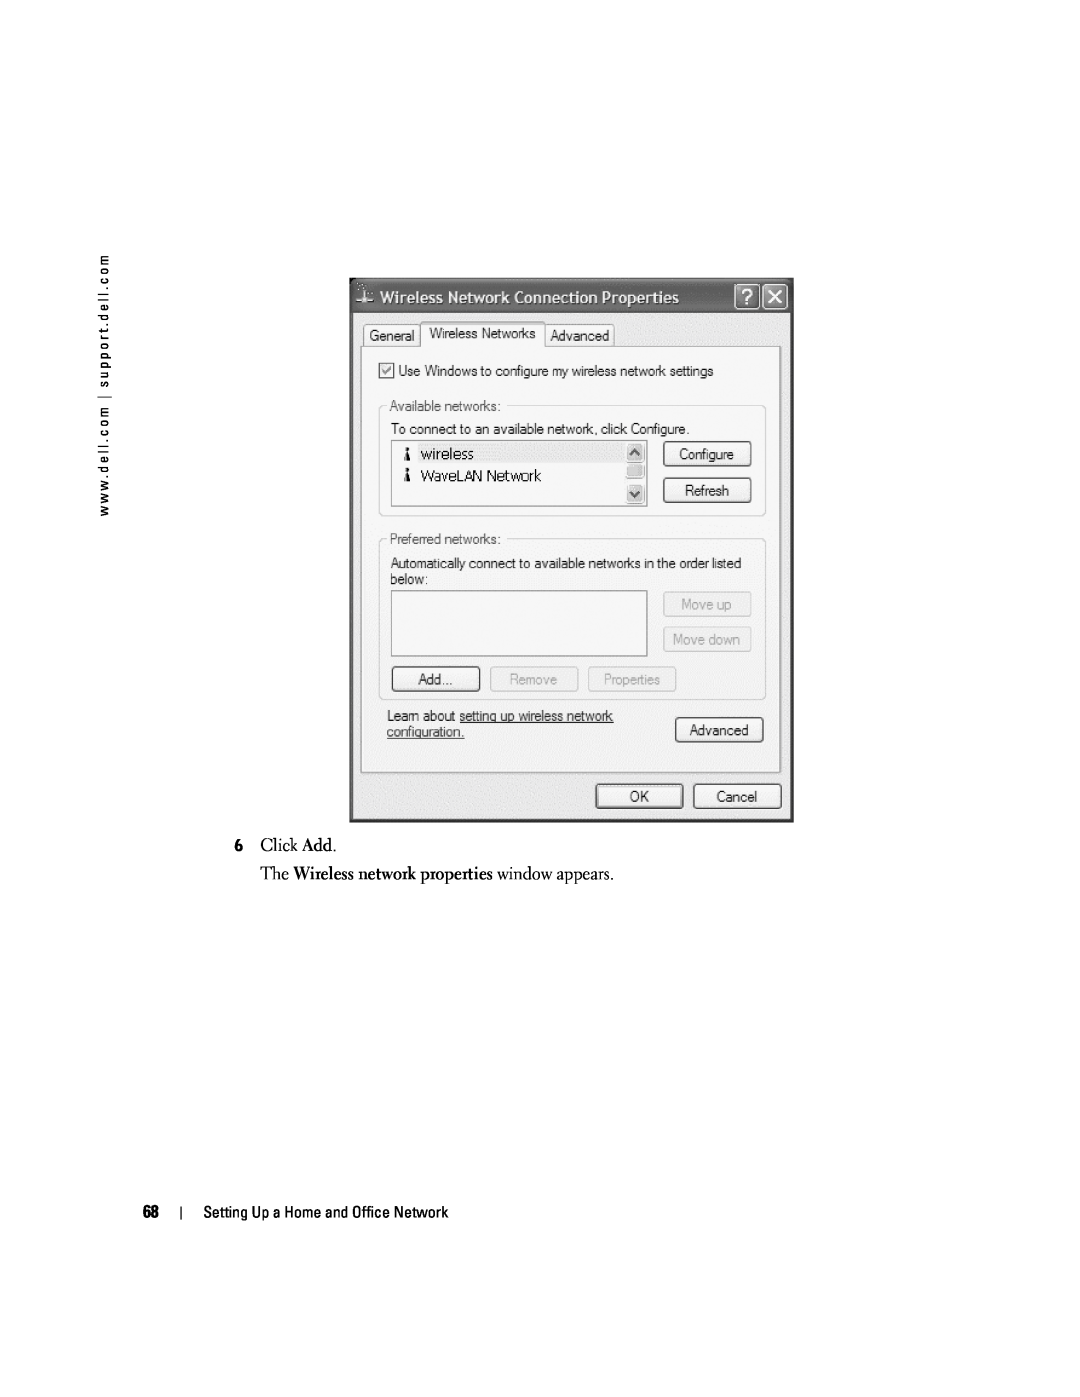 Dell PP09L owner manual Click Add The Wireless network properties window appears, Setting Up a Home and Office Network 